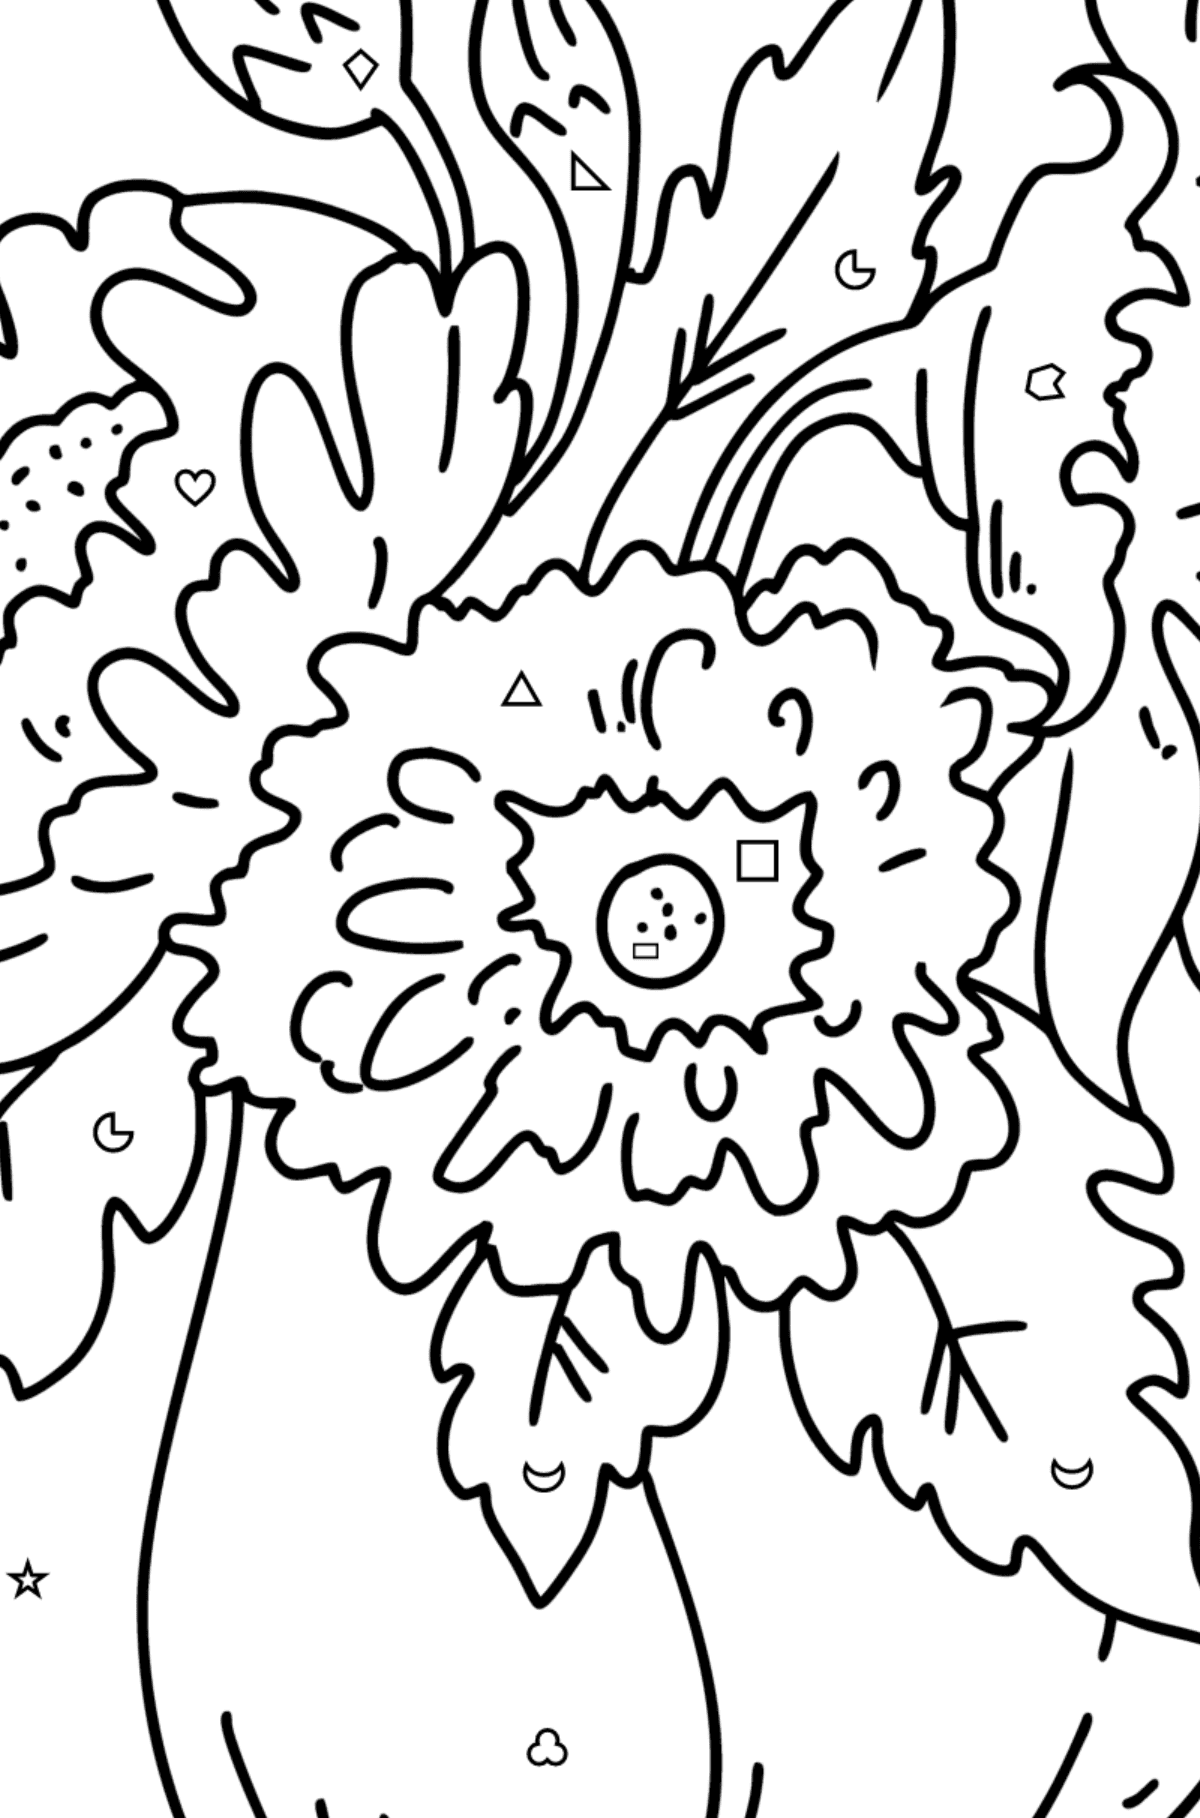 Coloring page Autumn - Pumpkin and Asters - Coloring by Geometric Shapes for Kids